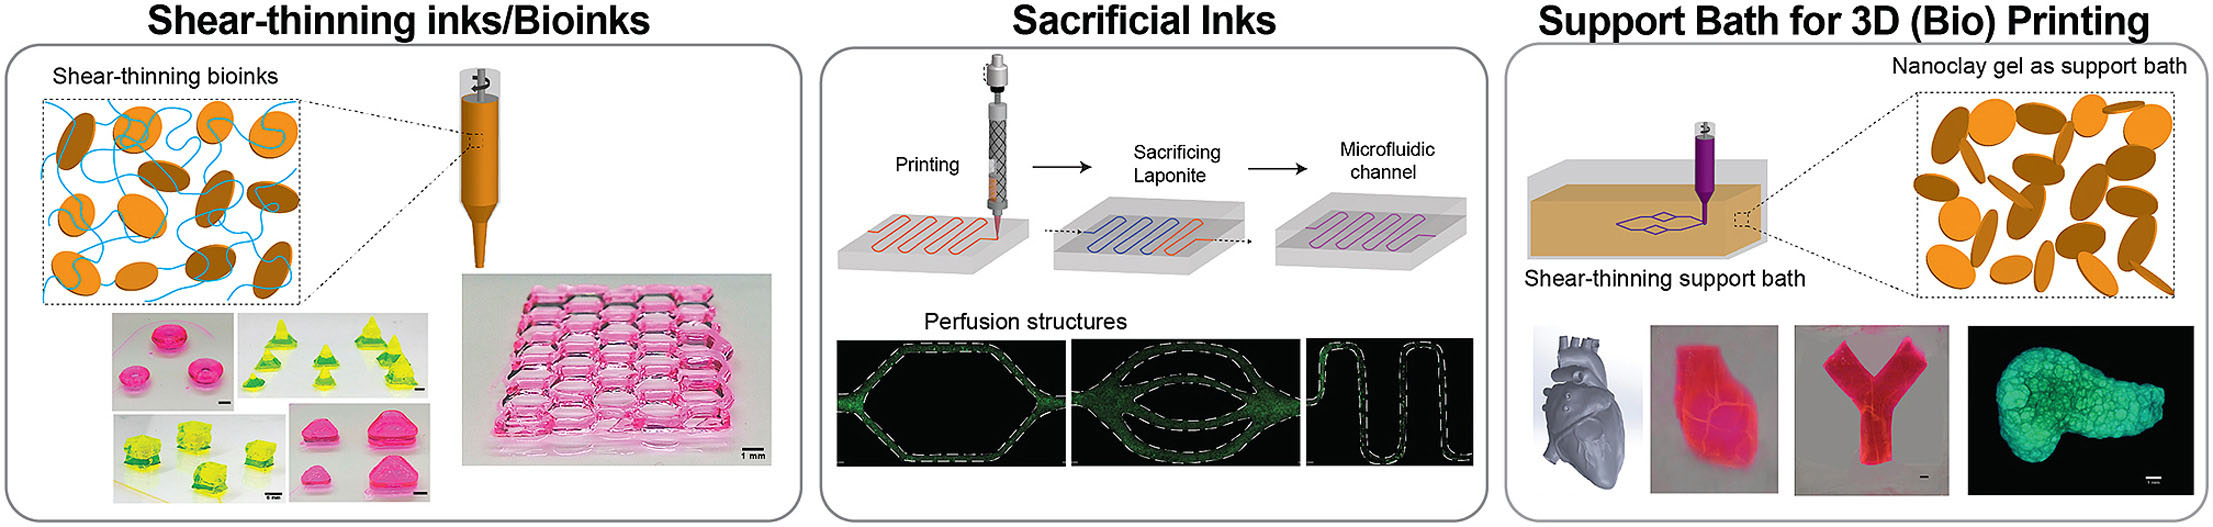 colloidal solutions of 2D nanosilicates as a platform technology to print complex structures via 3D bioprinting